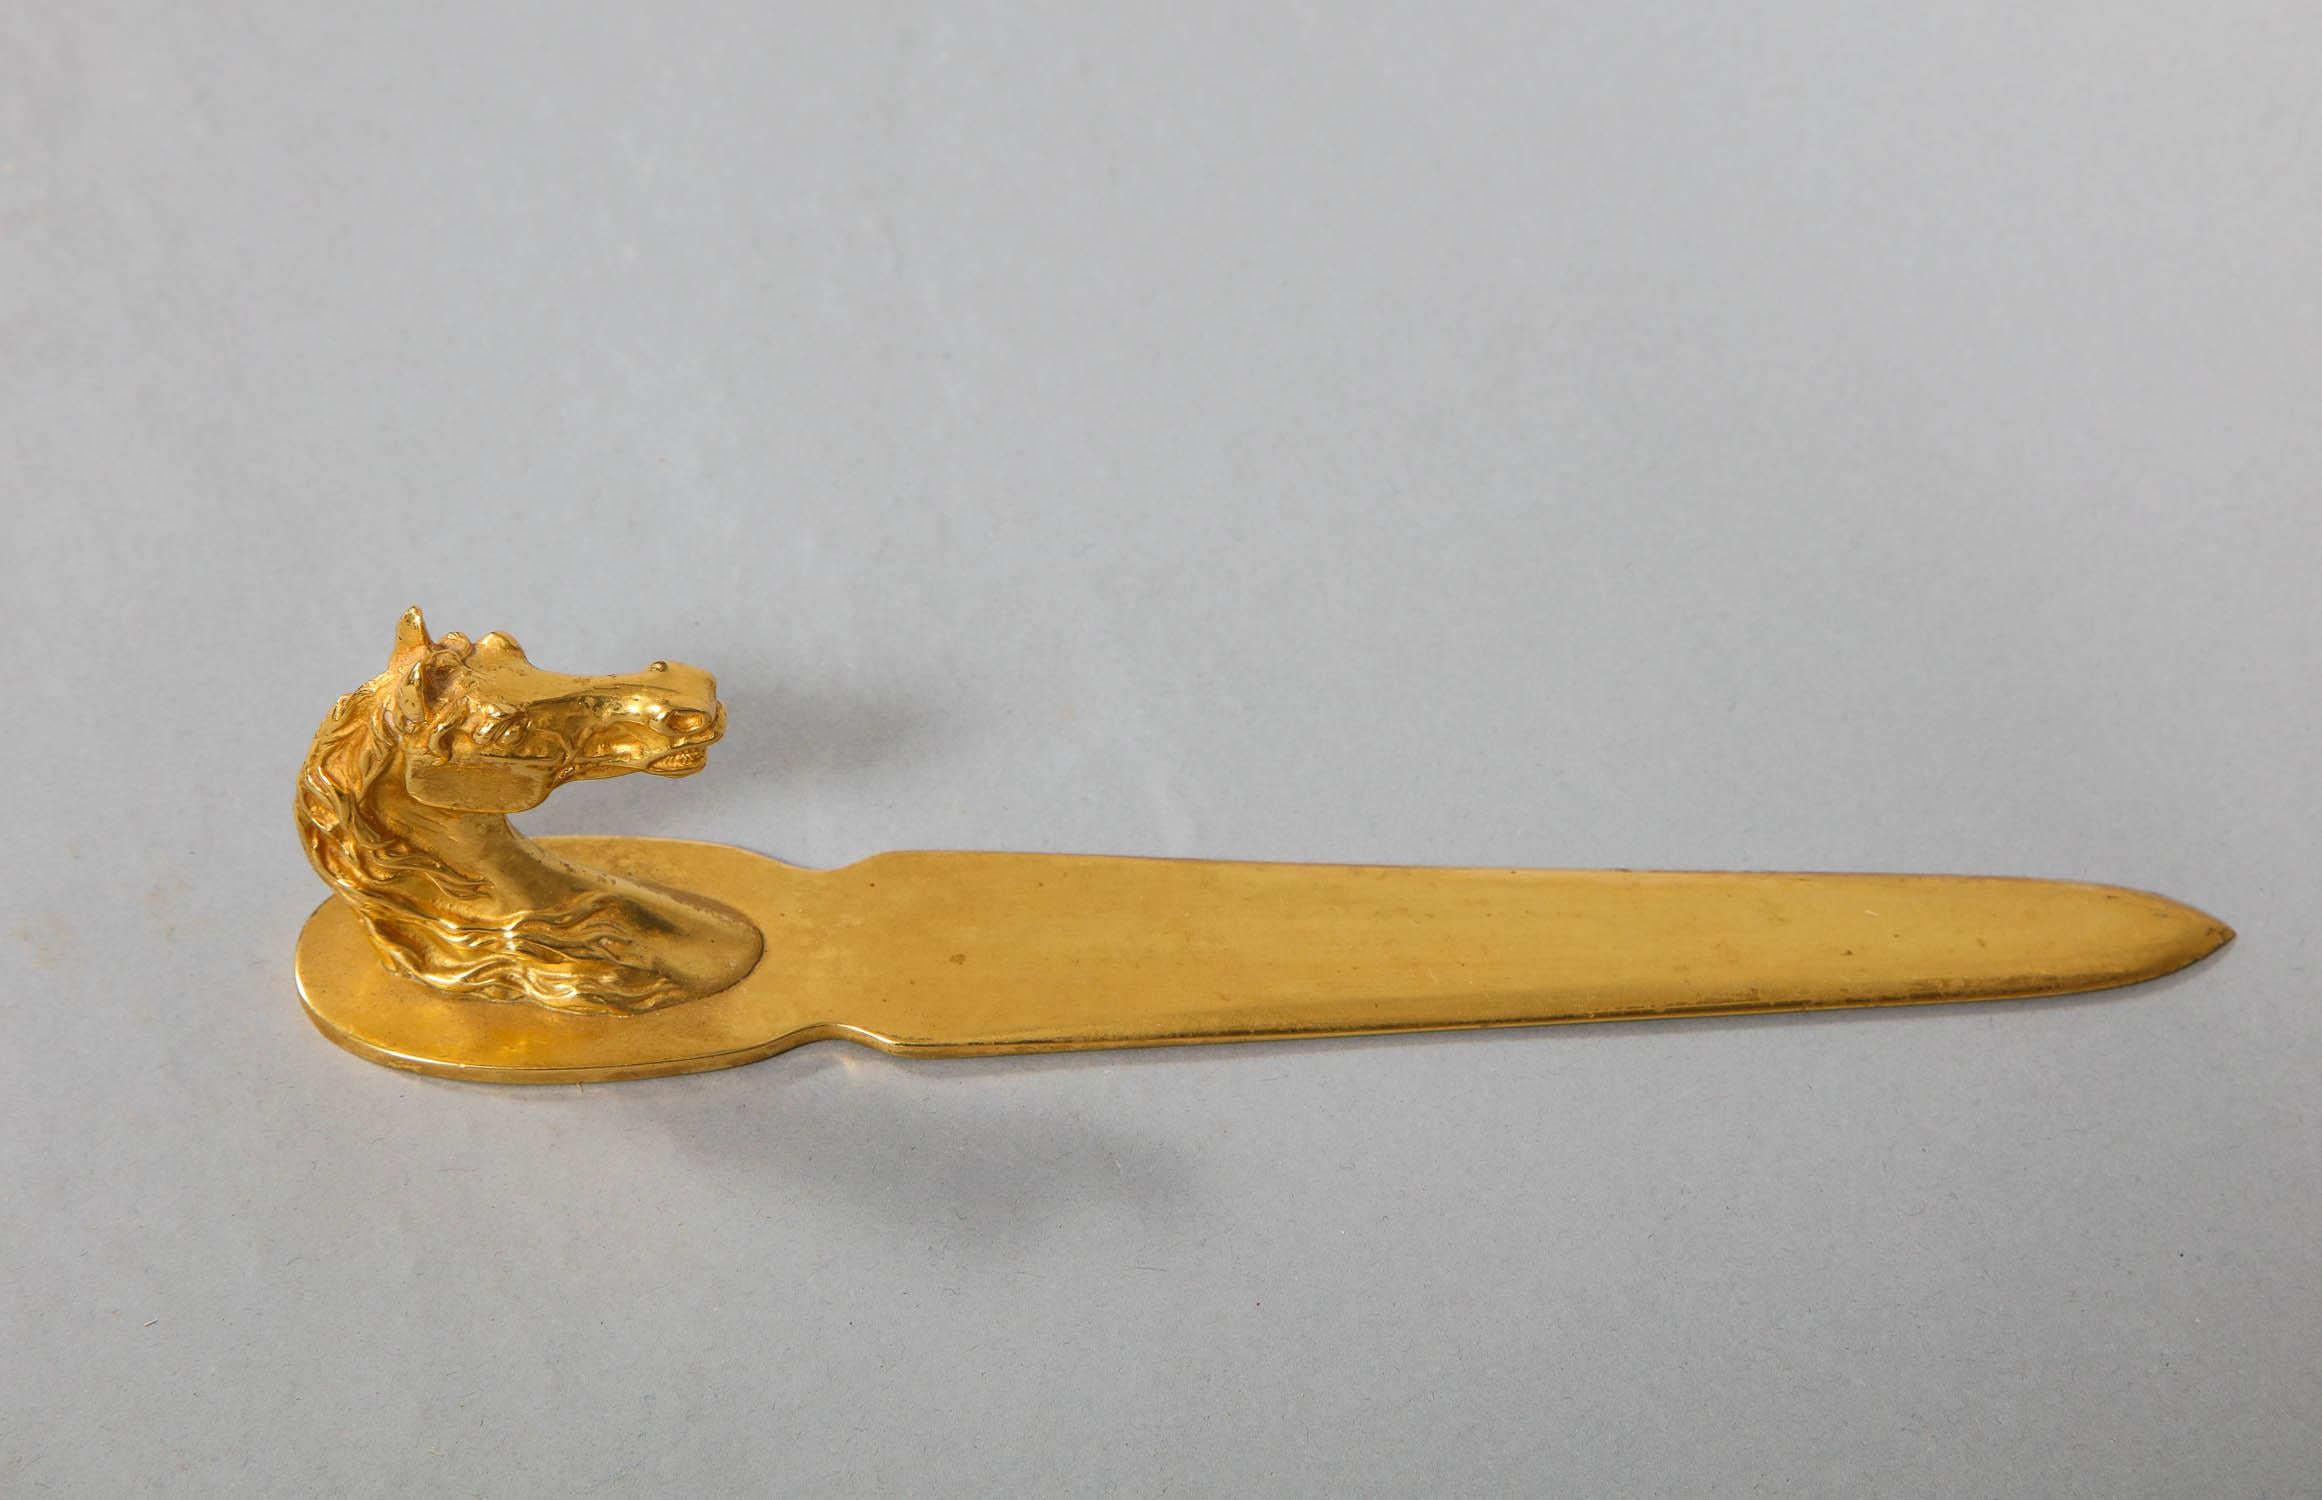 A gold-plated equestrian letter opener with a horse's head handle, stamped Hermes, Paris. This is an iconic Hermes design of the seventies, and is a must-have on any gentleman collector's wishlist. Purchased directly from Hermes' flagship Paris